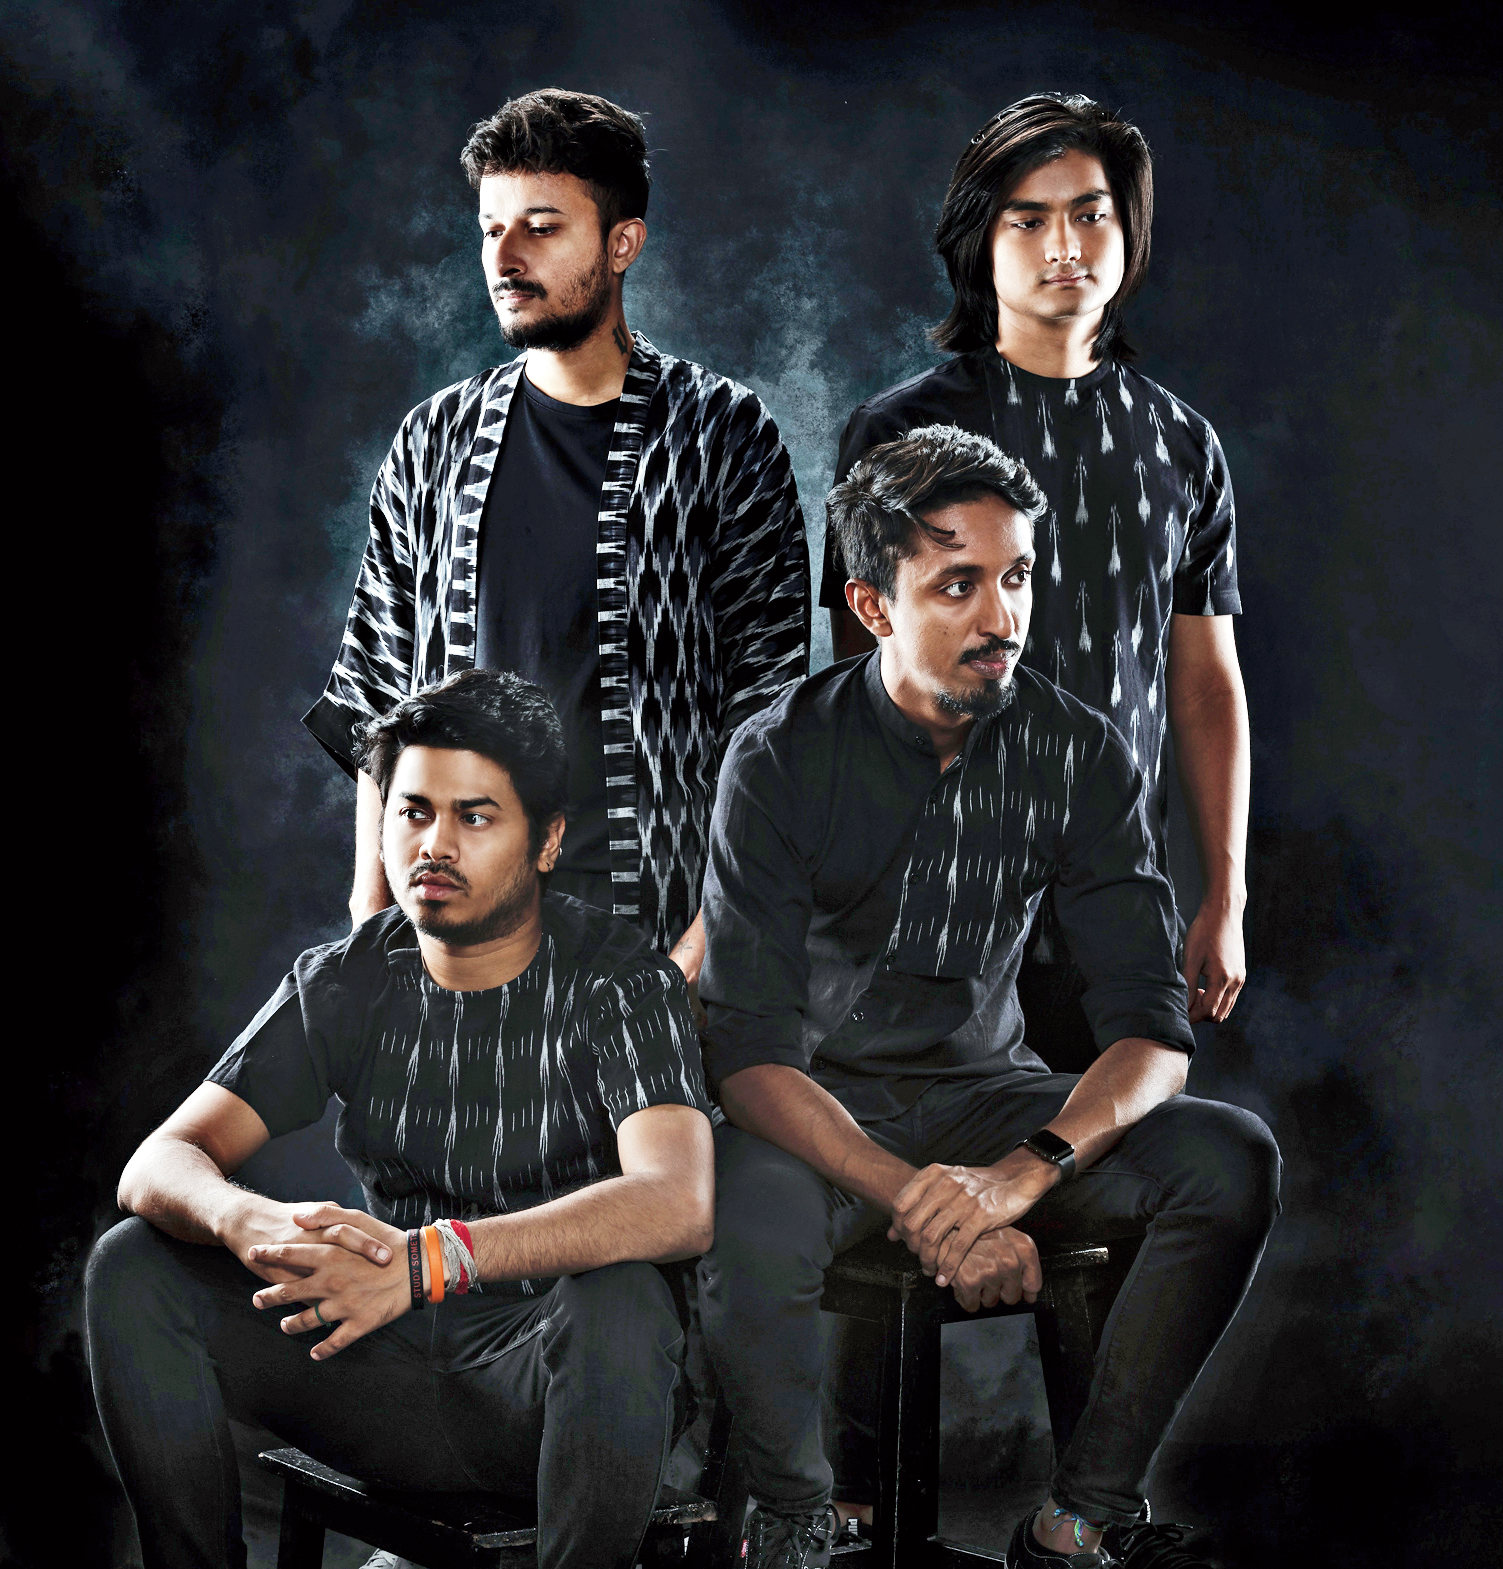 Nævne Ord side Soul sound: Aswekeepsearching, the Hindi post-rock band - Telegraph India